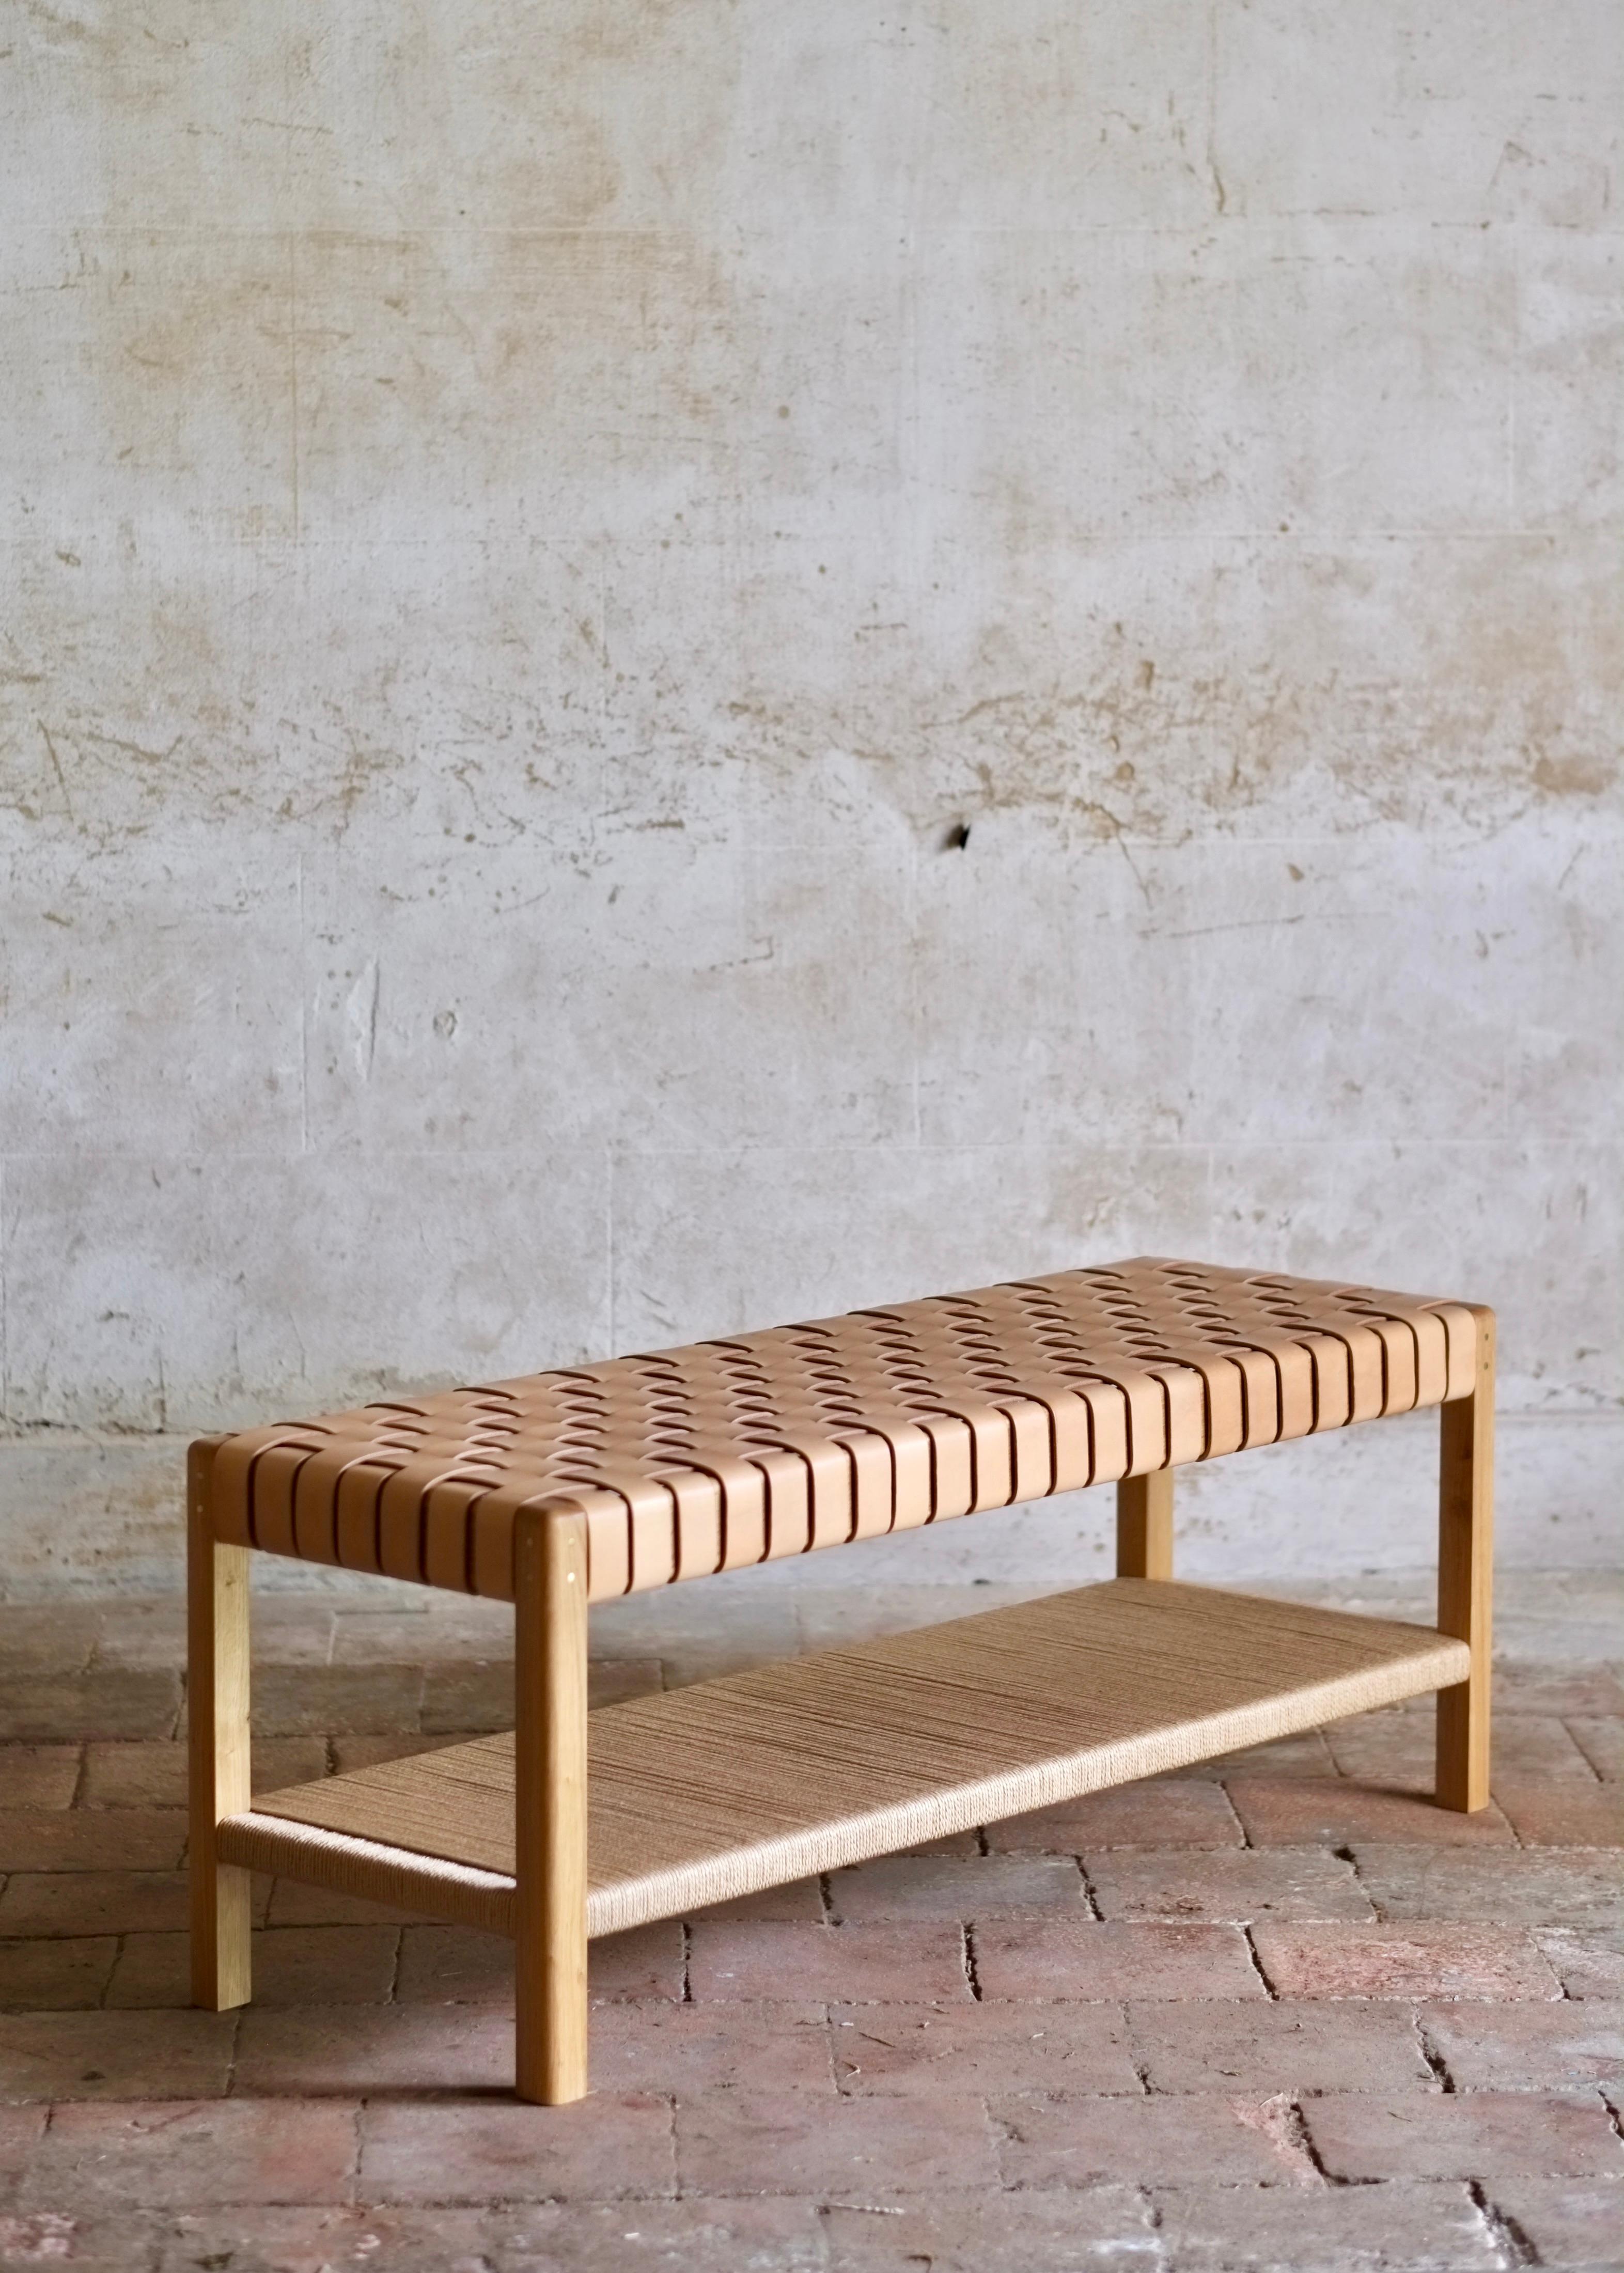 Inspired by the utilitarian and timeless minimalism of the Shaker tradition, the Cinch bench fuses traditional timber frame joinery and classic leather working techniques. Shaped legs and pinned tenon joints are paired with woven oak bark tanned